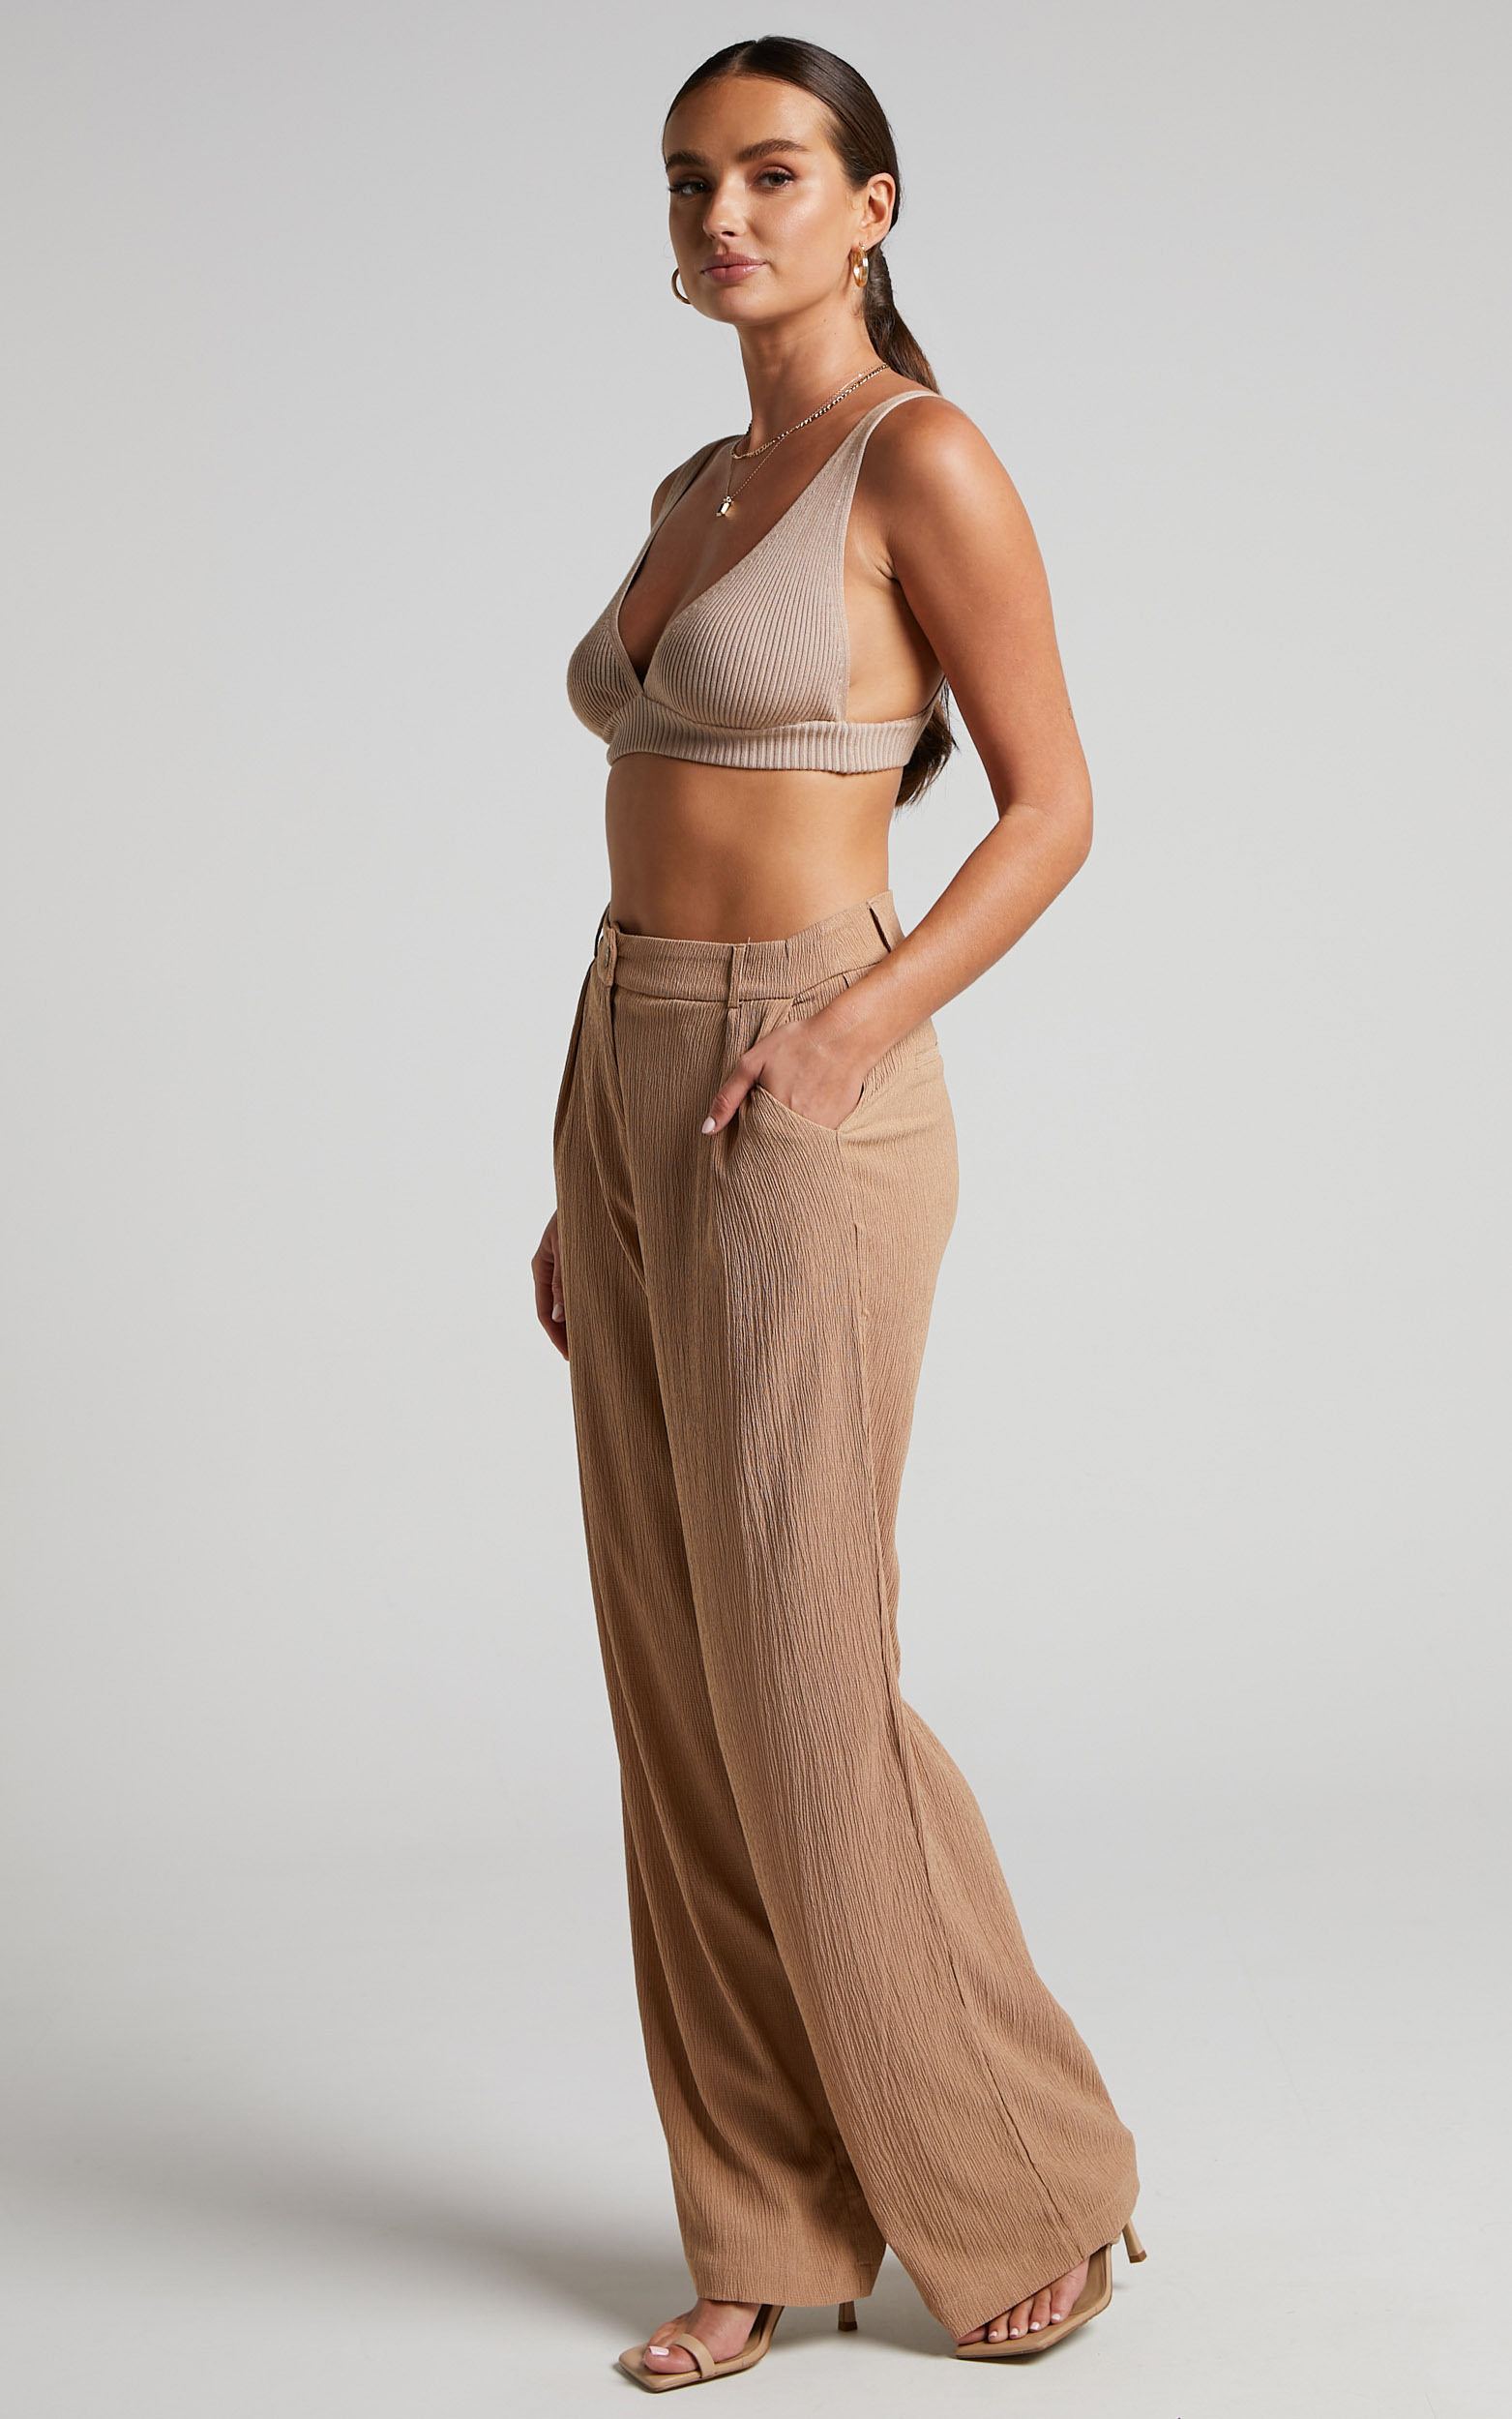 Isabeau Trousers - Relaxed Box Pleat Tailored Trousers in Mocha - 04, BRN2, hi-res image number null